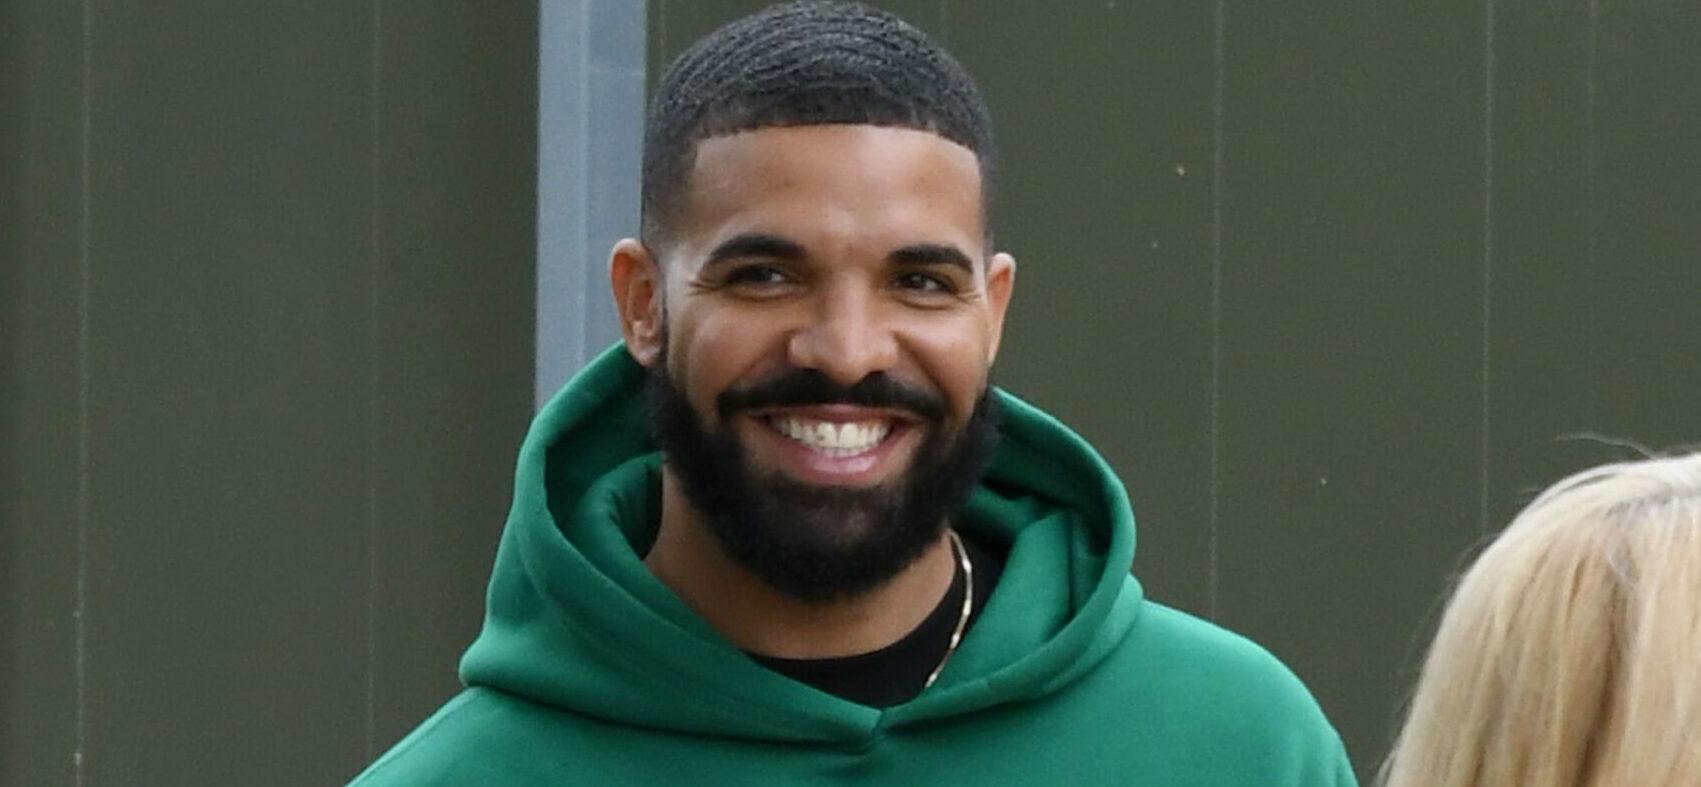 Drake Will Take Home Over $4.5 Million If His Bets For The Super Bowl Wins